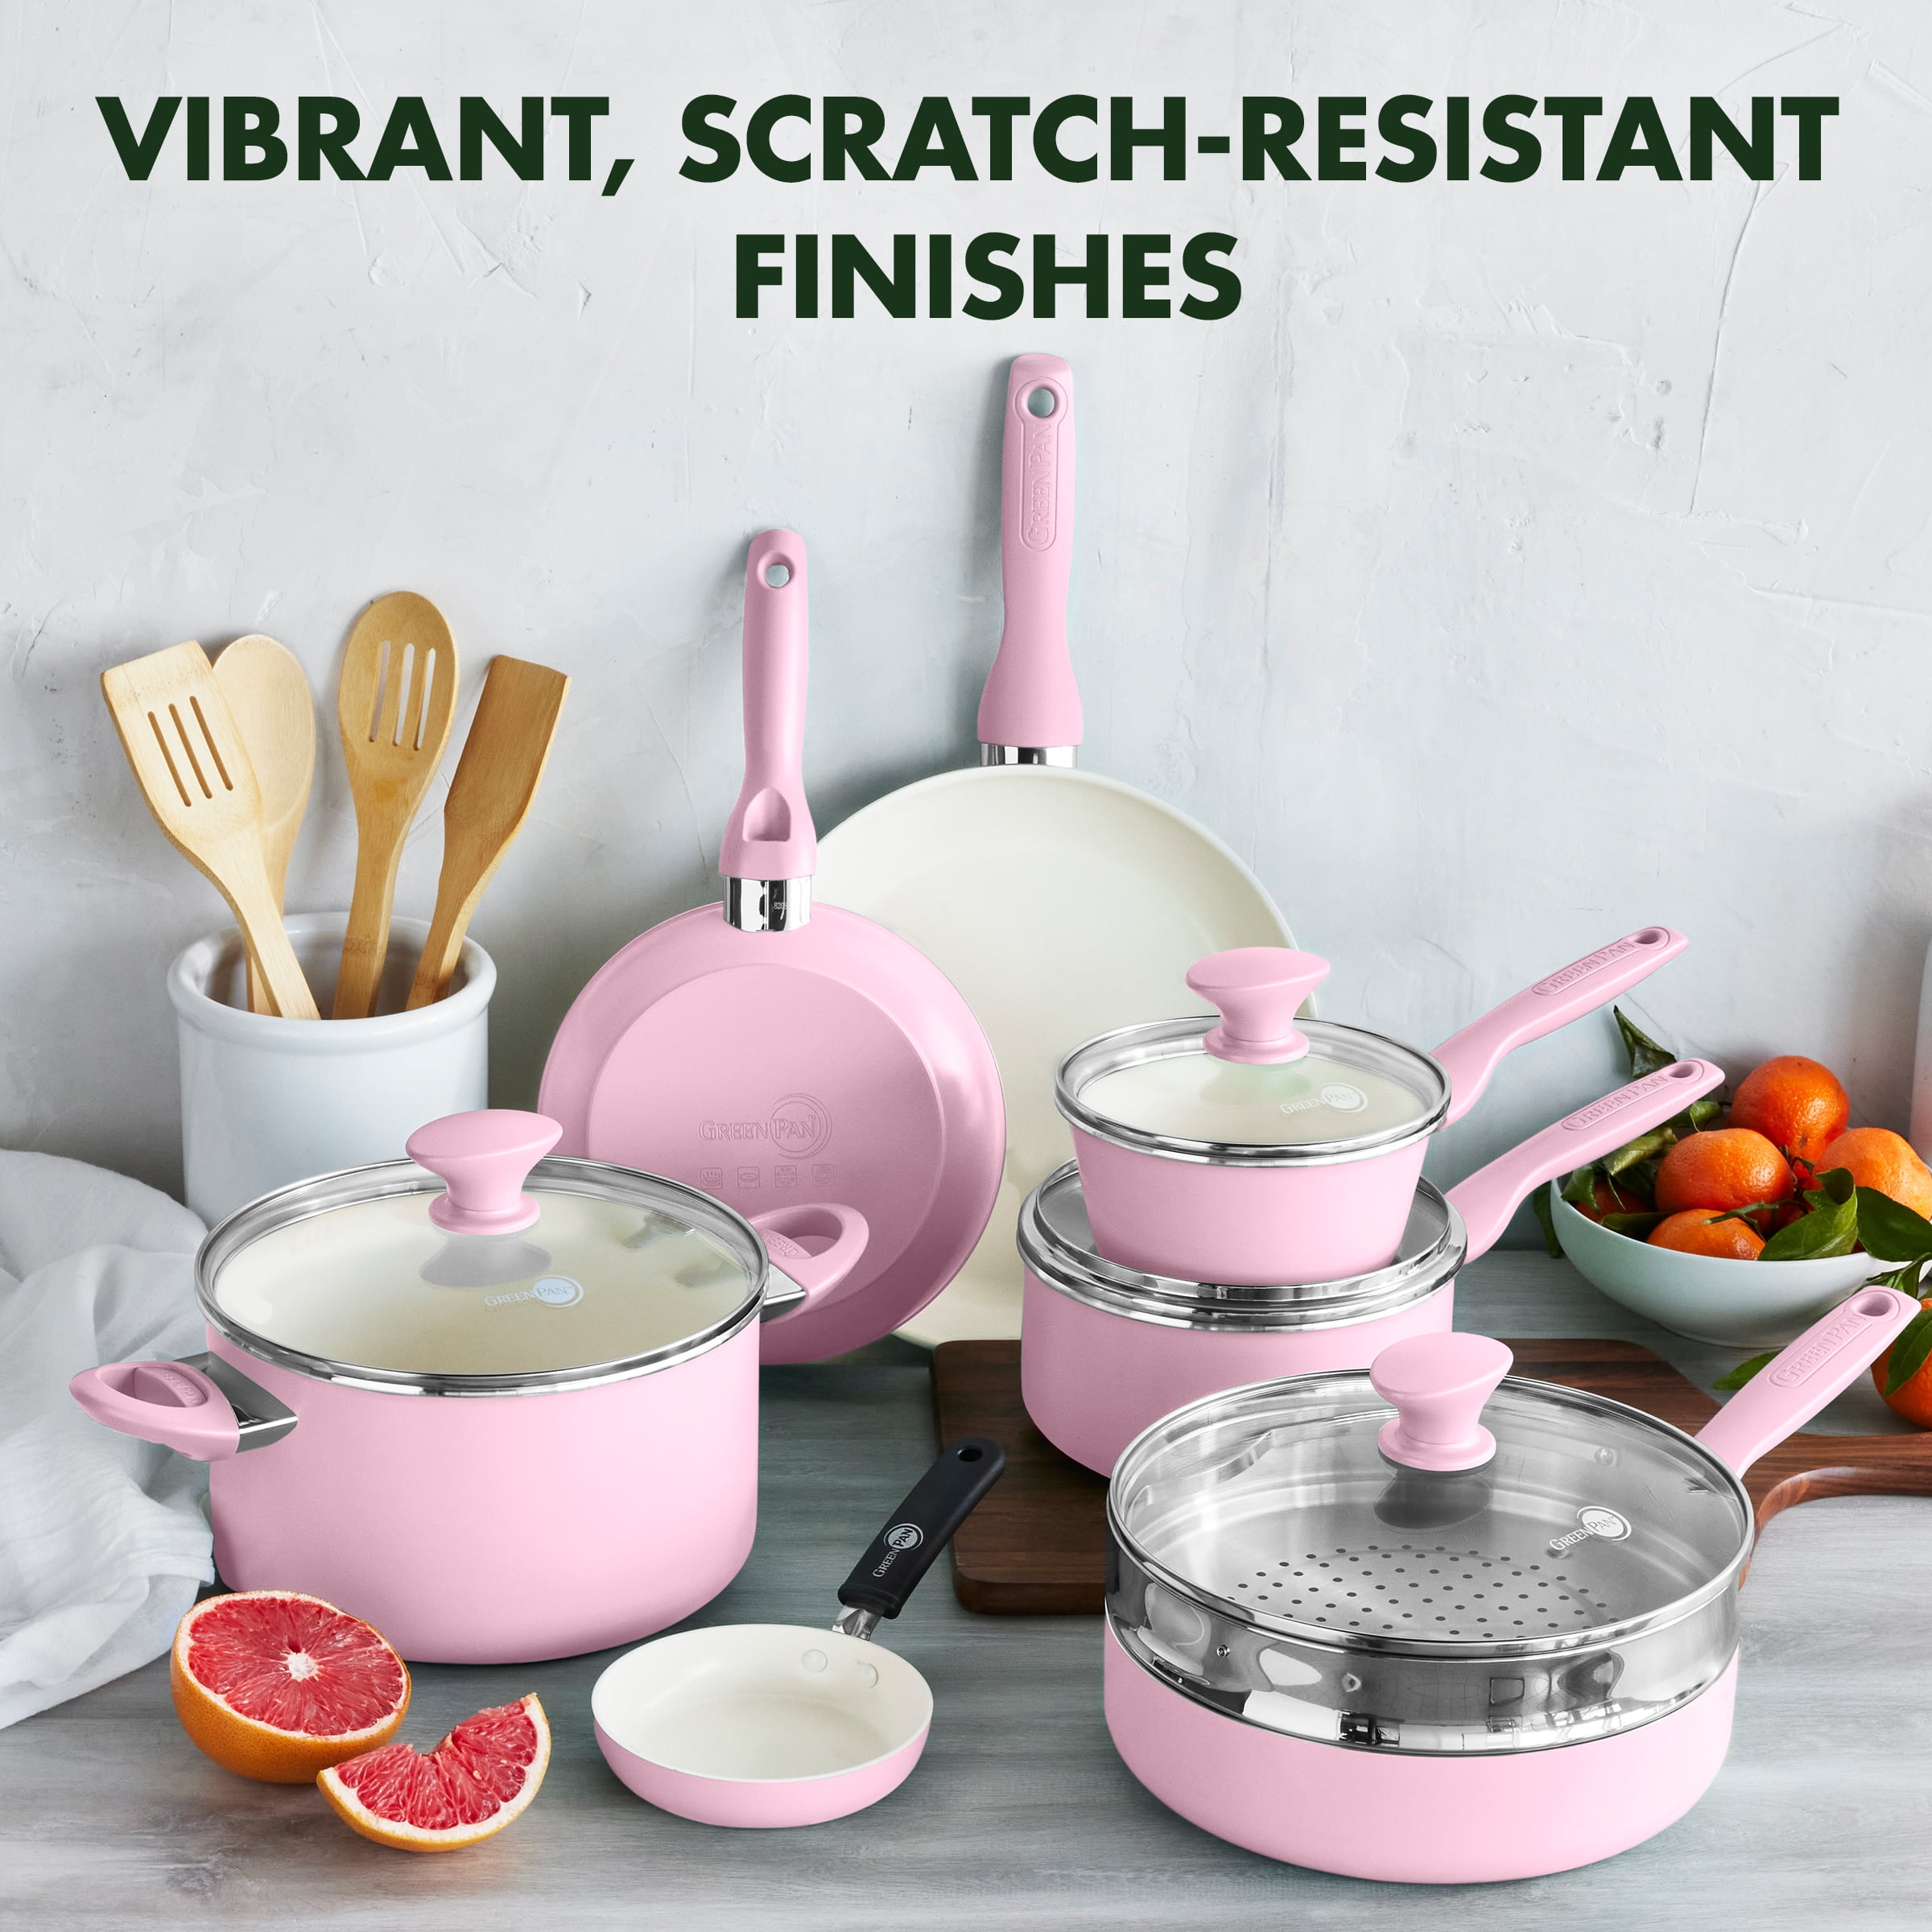 Aoibox 16-Piece Ceramic Kitchen Cookware Pots and Frying Sauce Saute Pans  Set, Soft Pink SNPH002IN436 - The Home Depot